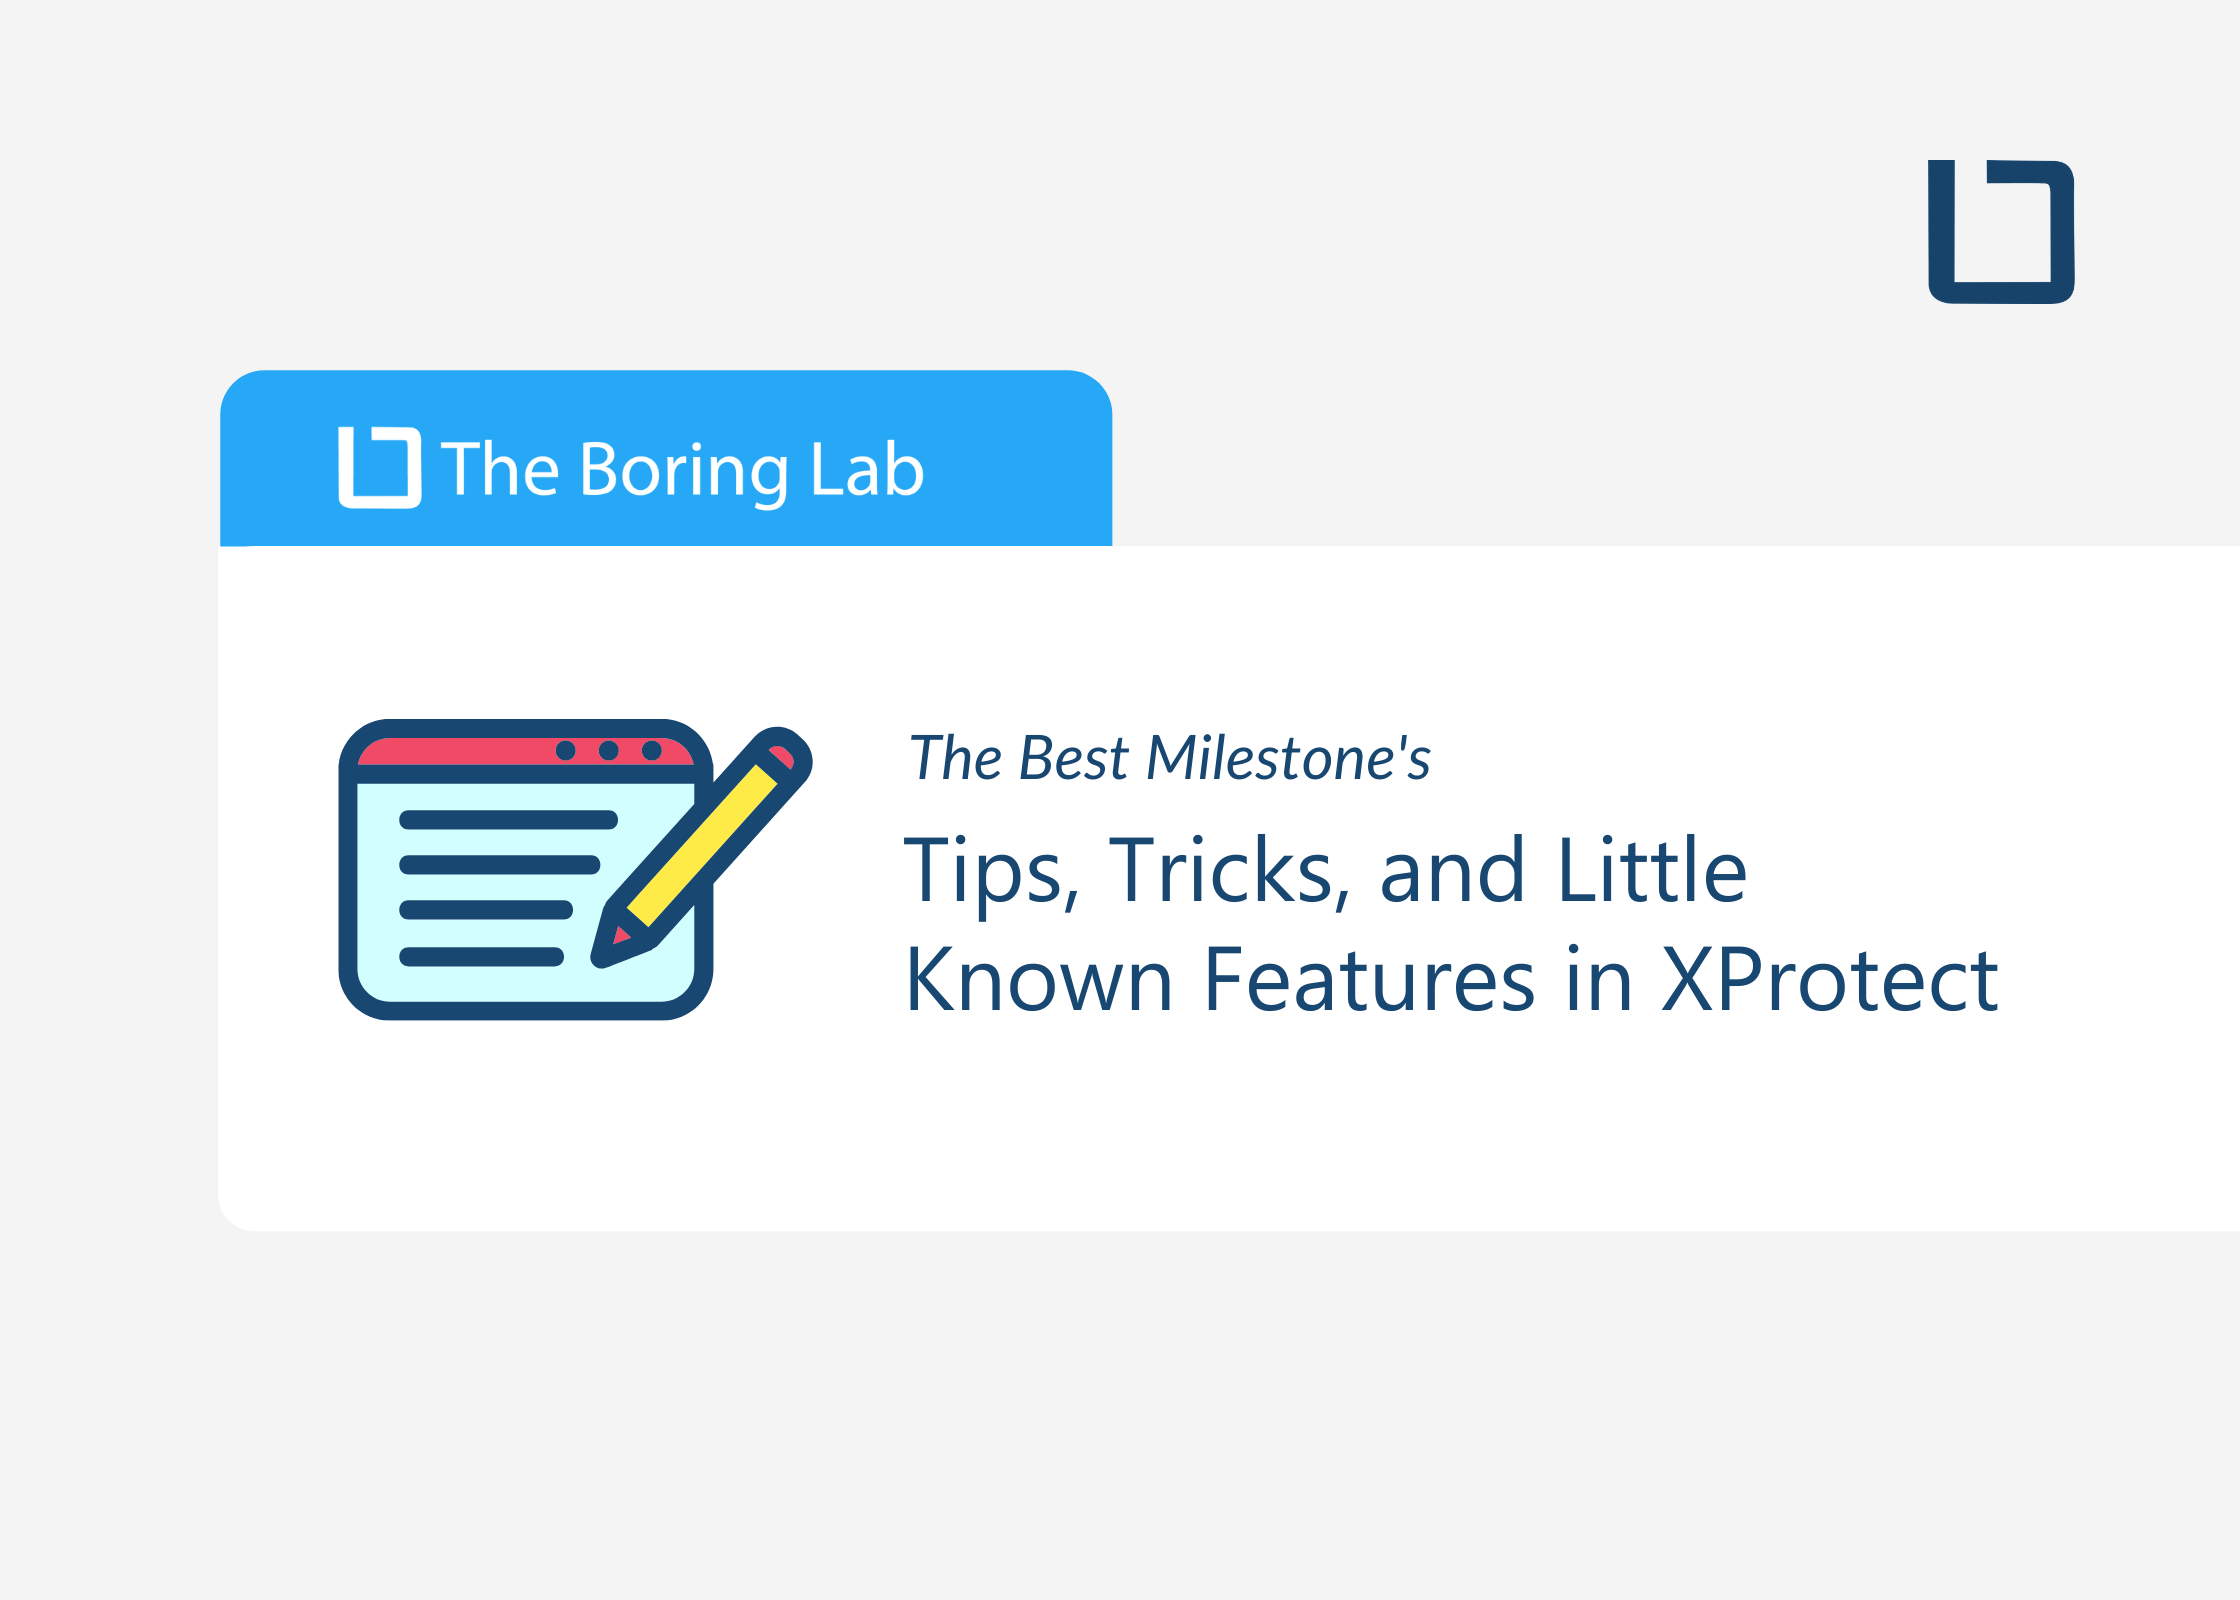 The Best of: Milestone’s Tips, Tricks, and Little Known Features in XProtect